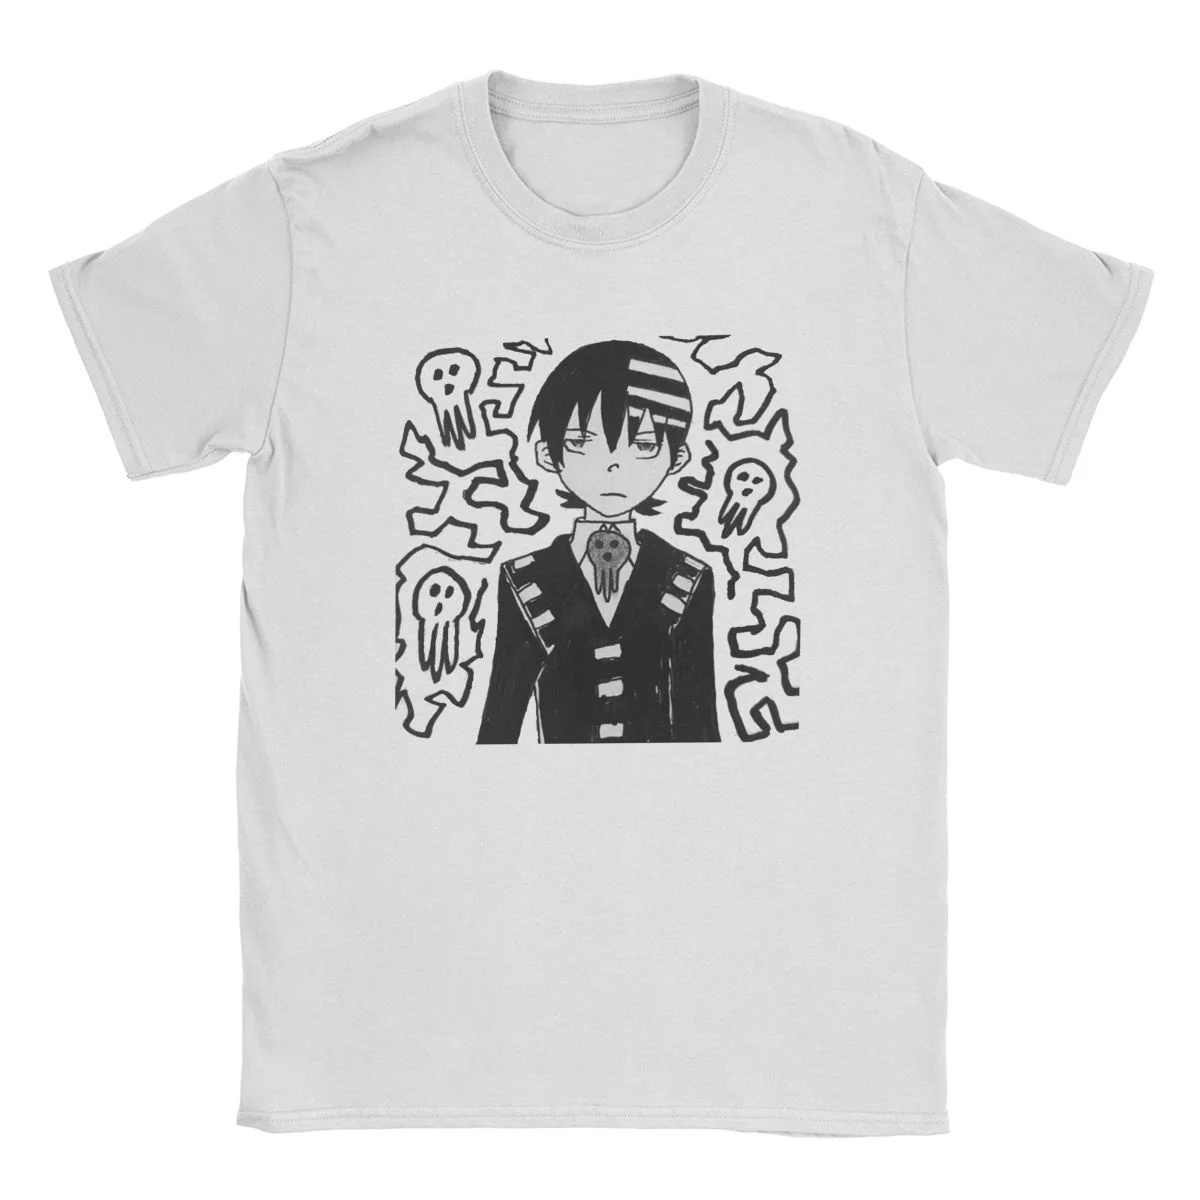 

Awesome Death The Kid Soul Eater T-Shirt Men Crewneck T Shirts Anime Manga Short Sleeve Tees Birthday Gift Clothes